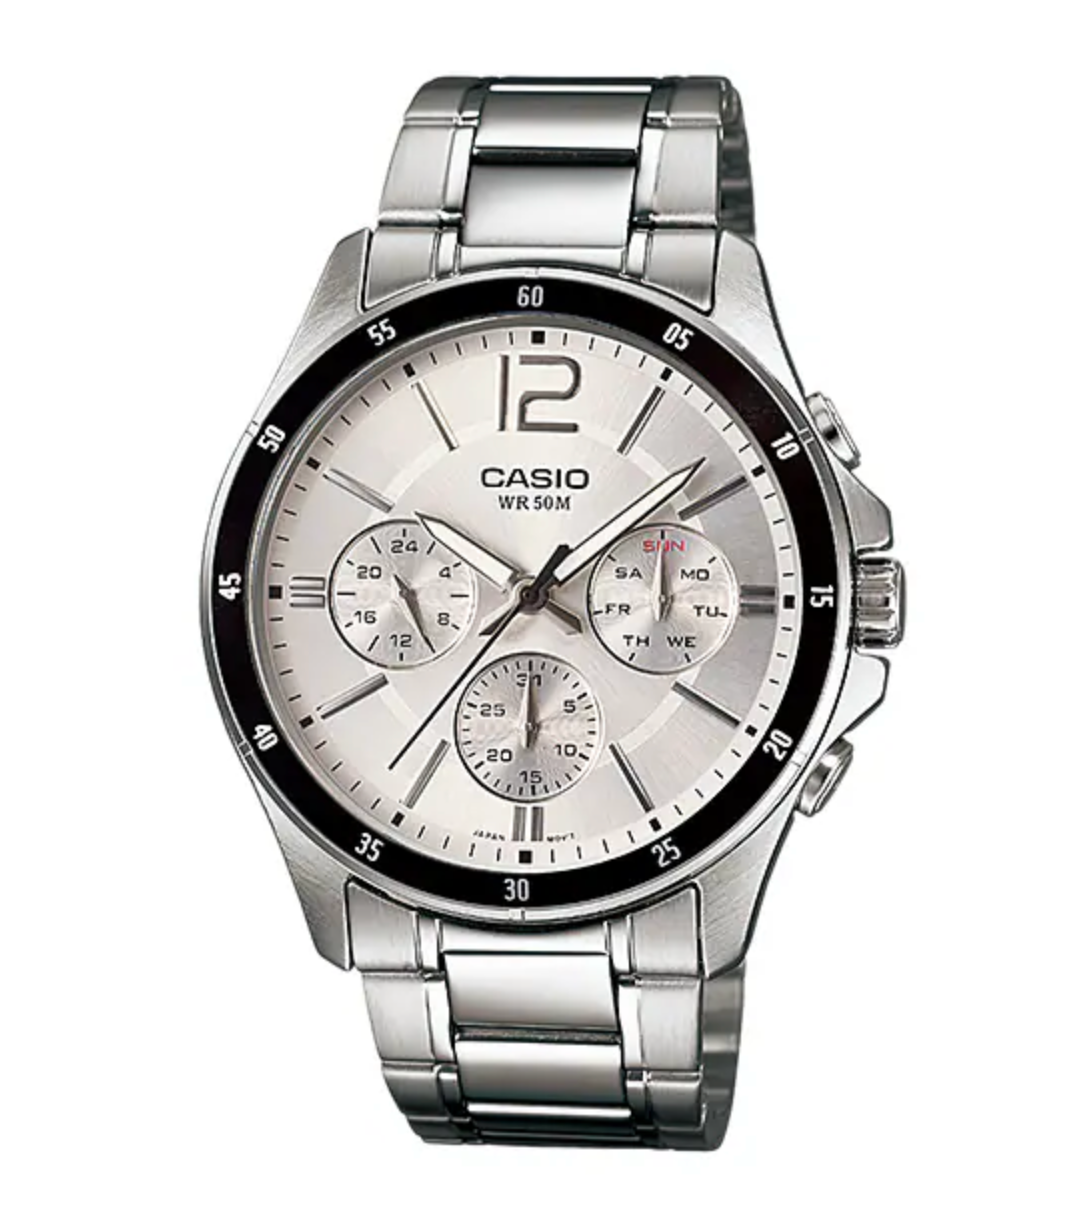 Casio Men's Watch Chronograph Stainless Steel Silver MTP-1374D-7AVDF